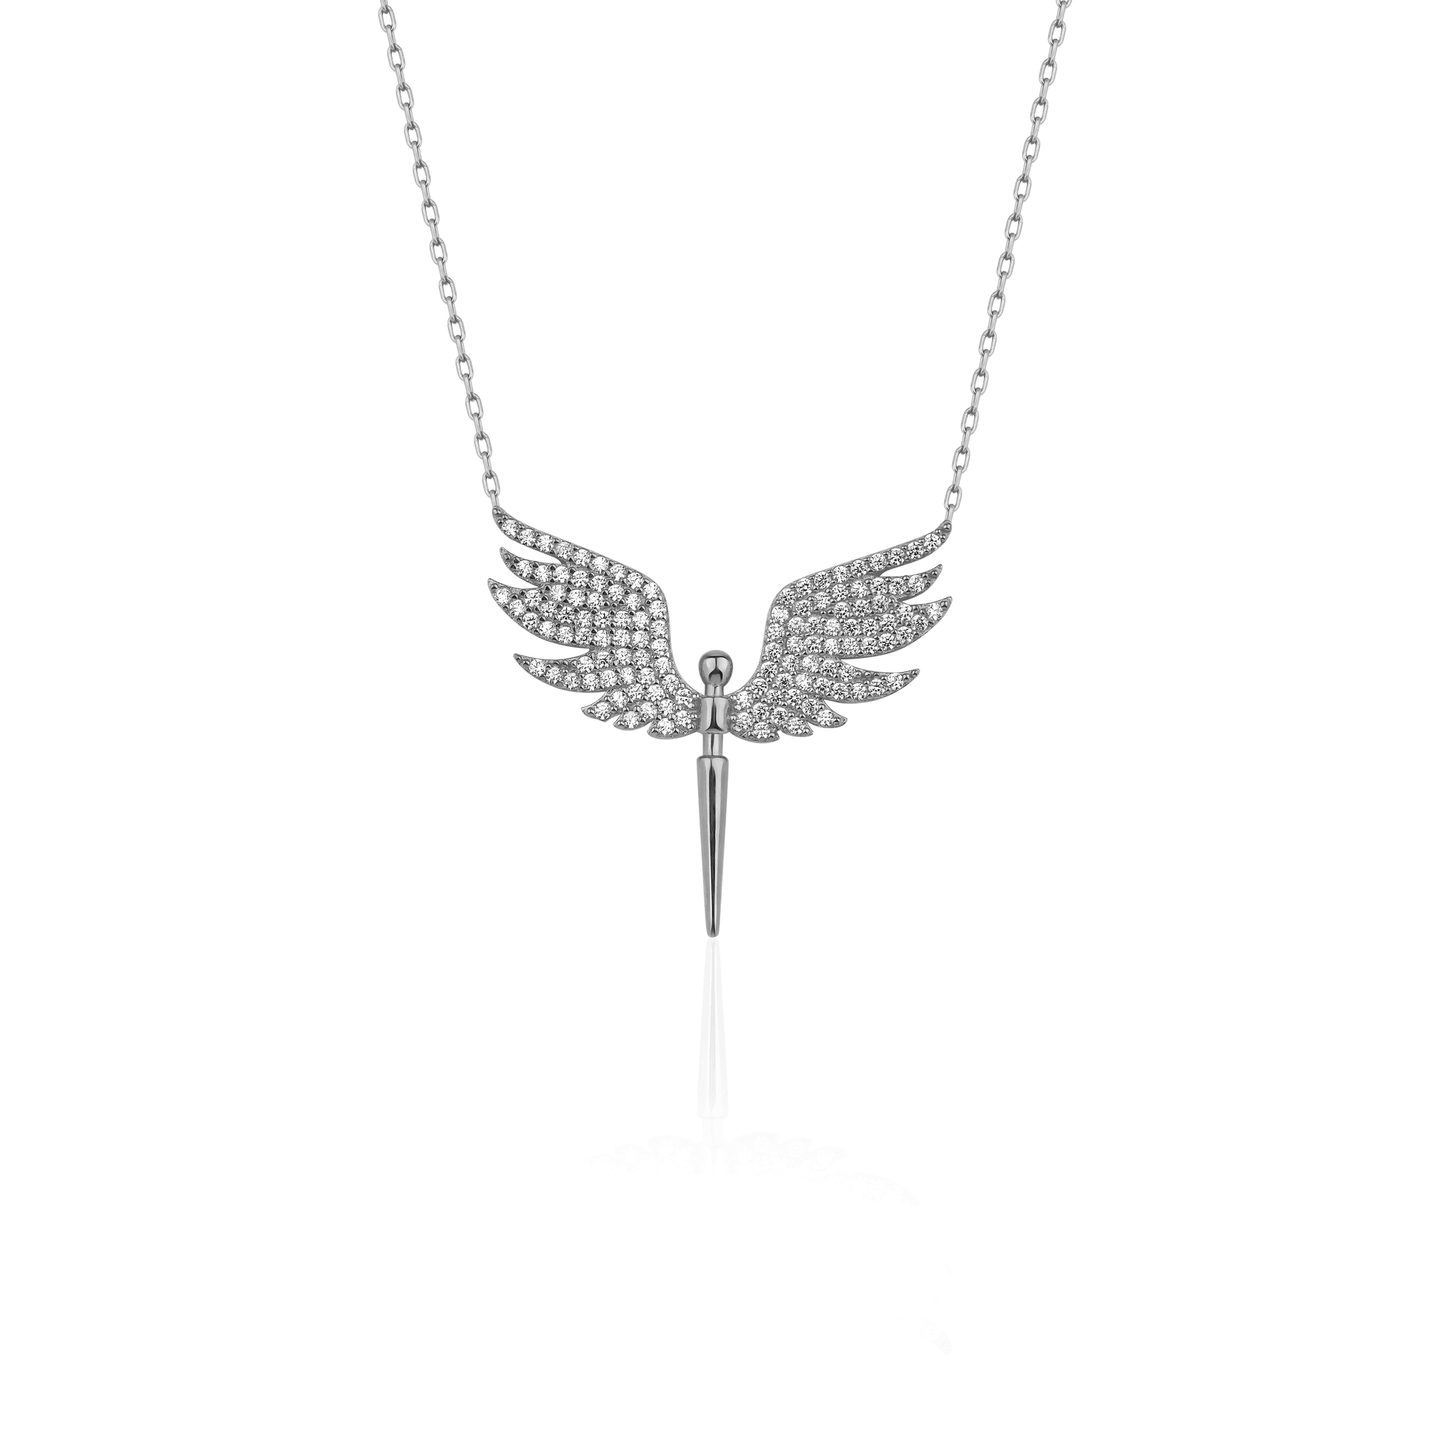 Michael Angel Silver Necklace